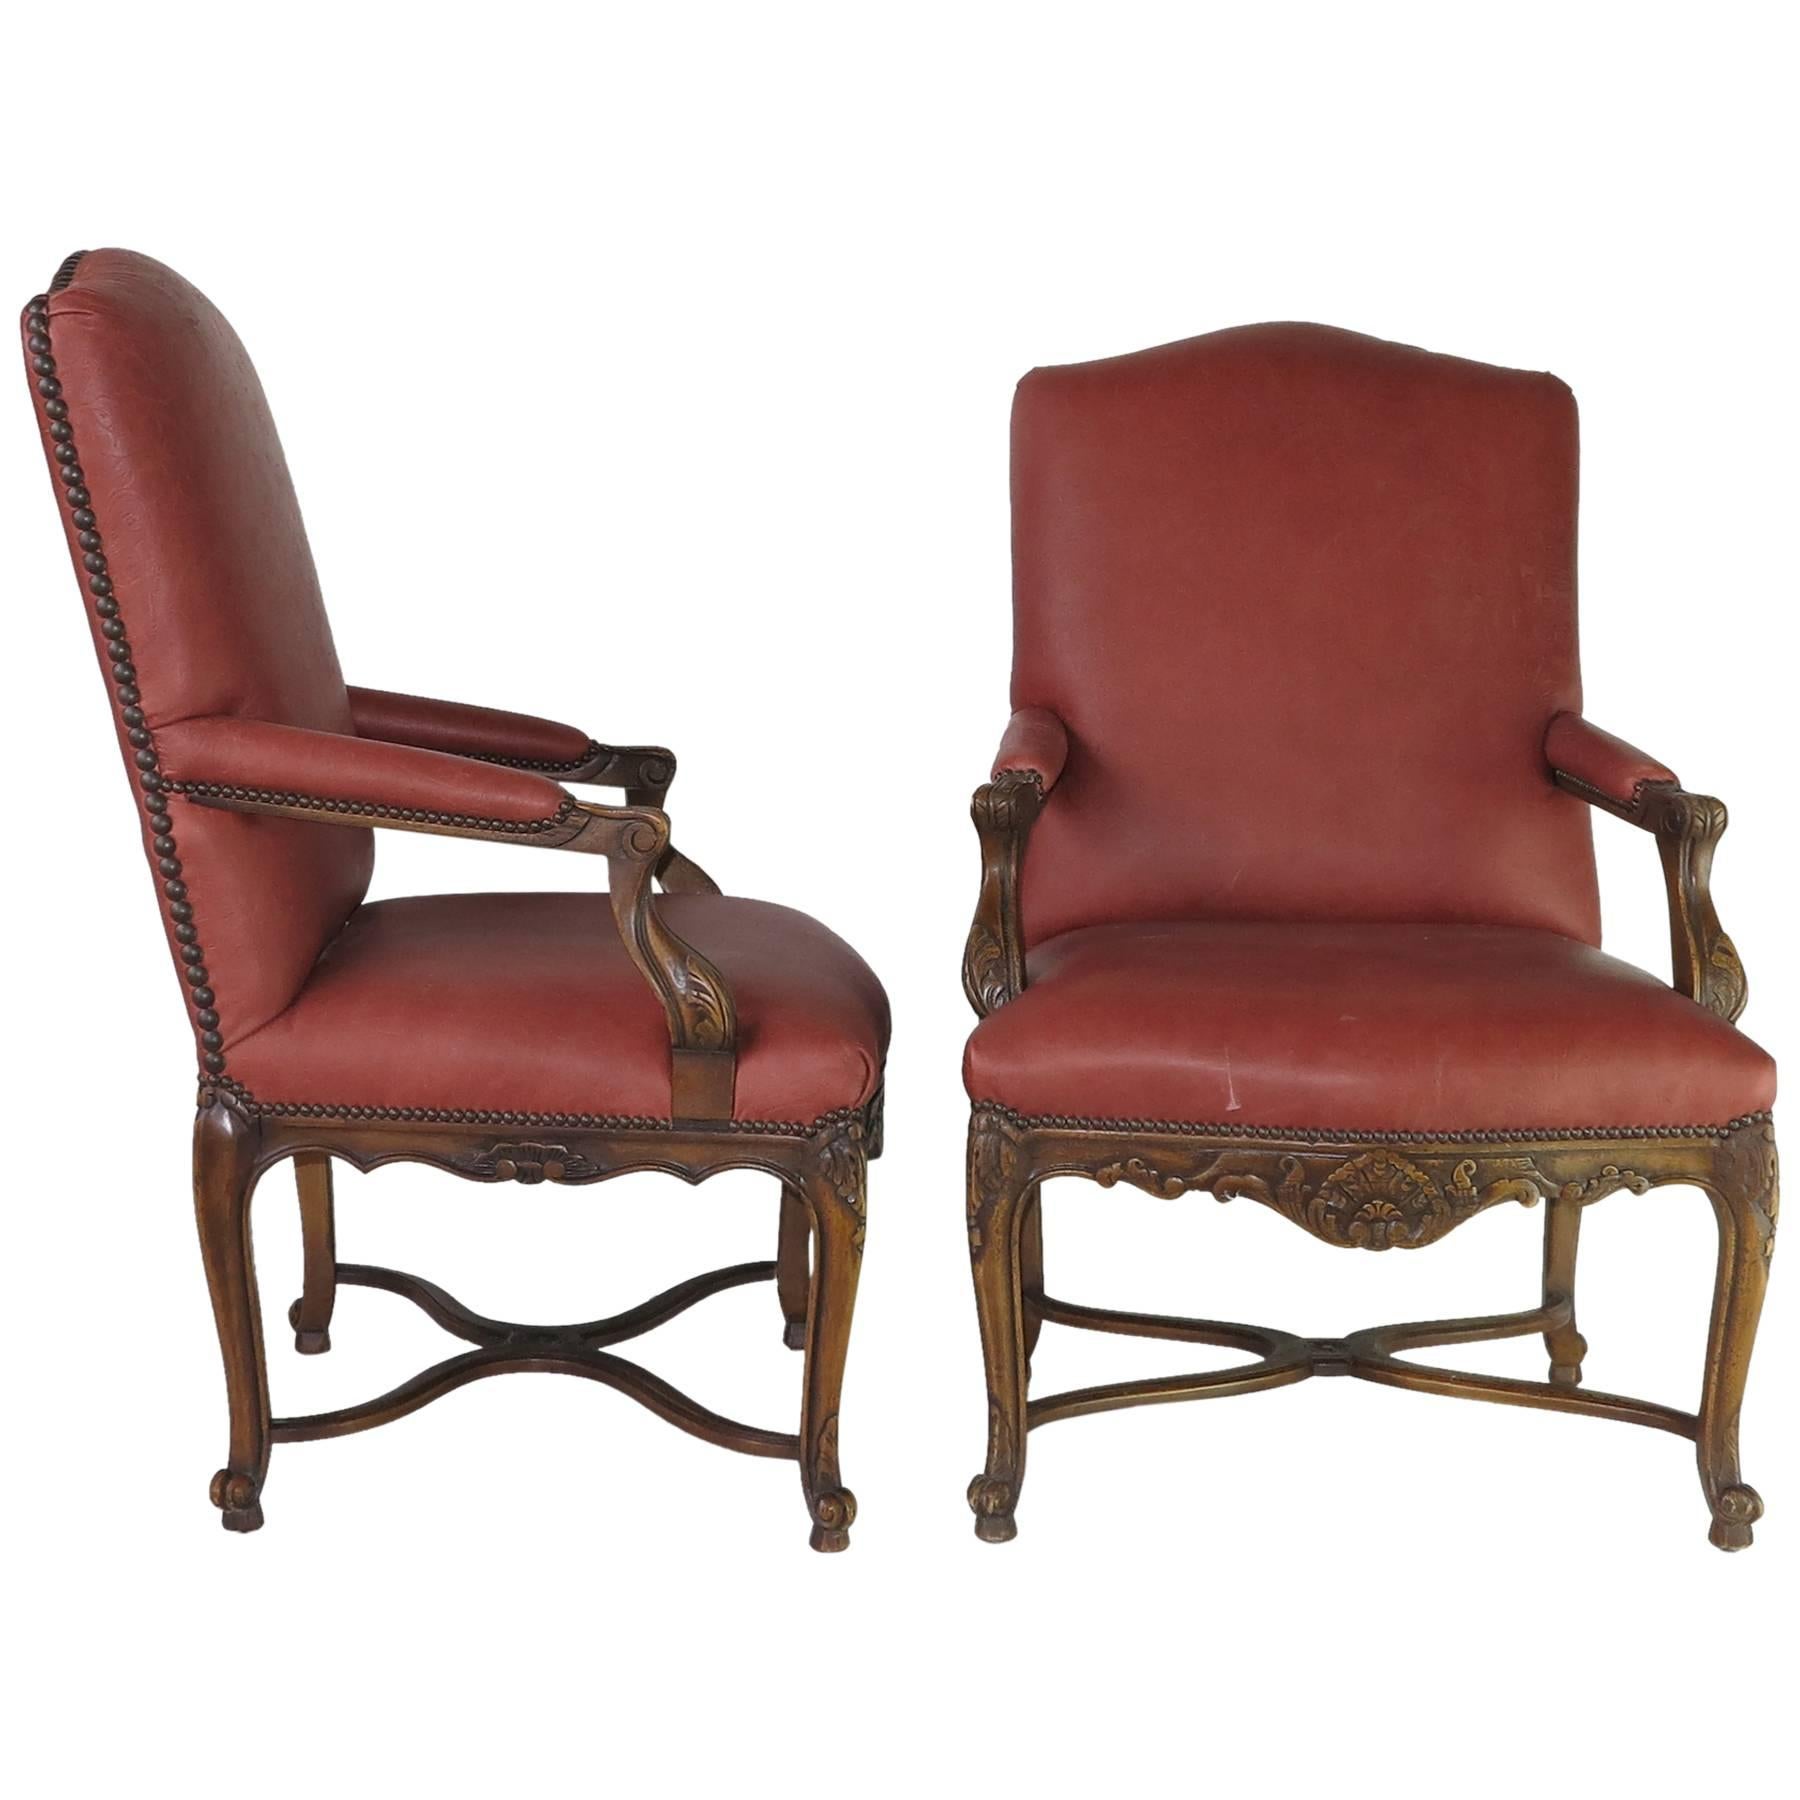 Vintage  Embossed Red  Louis xiv style  Arm Chairs